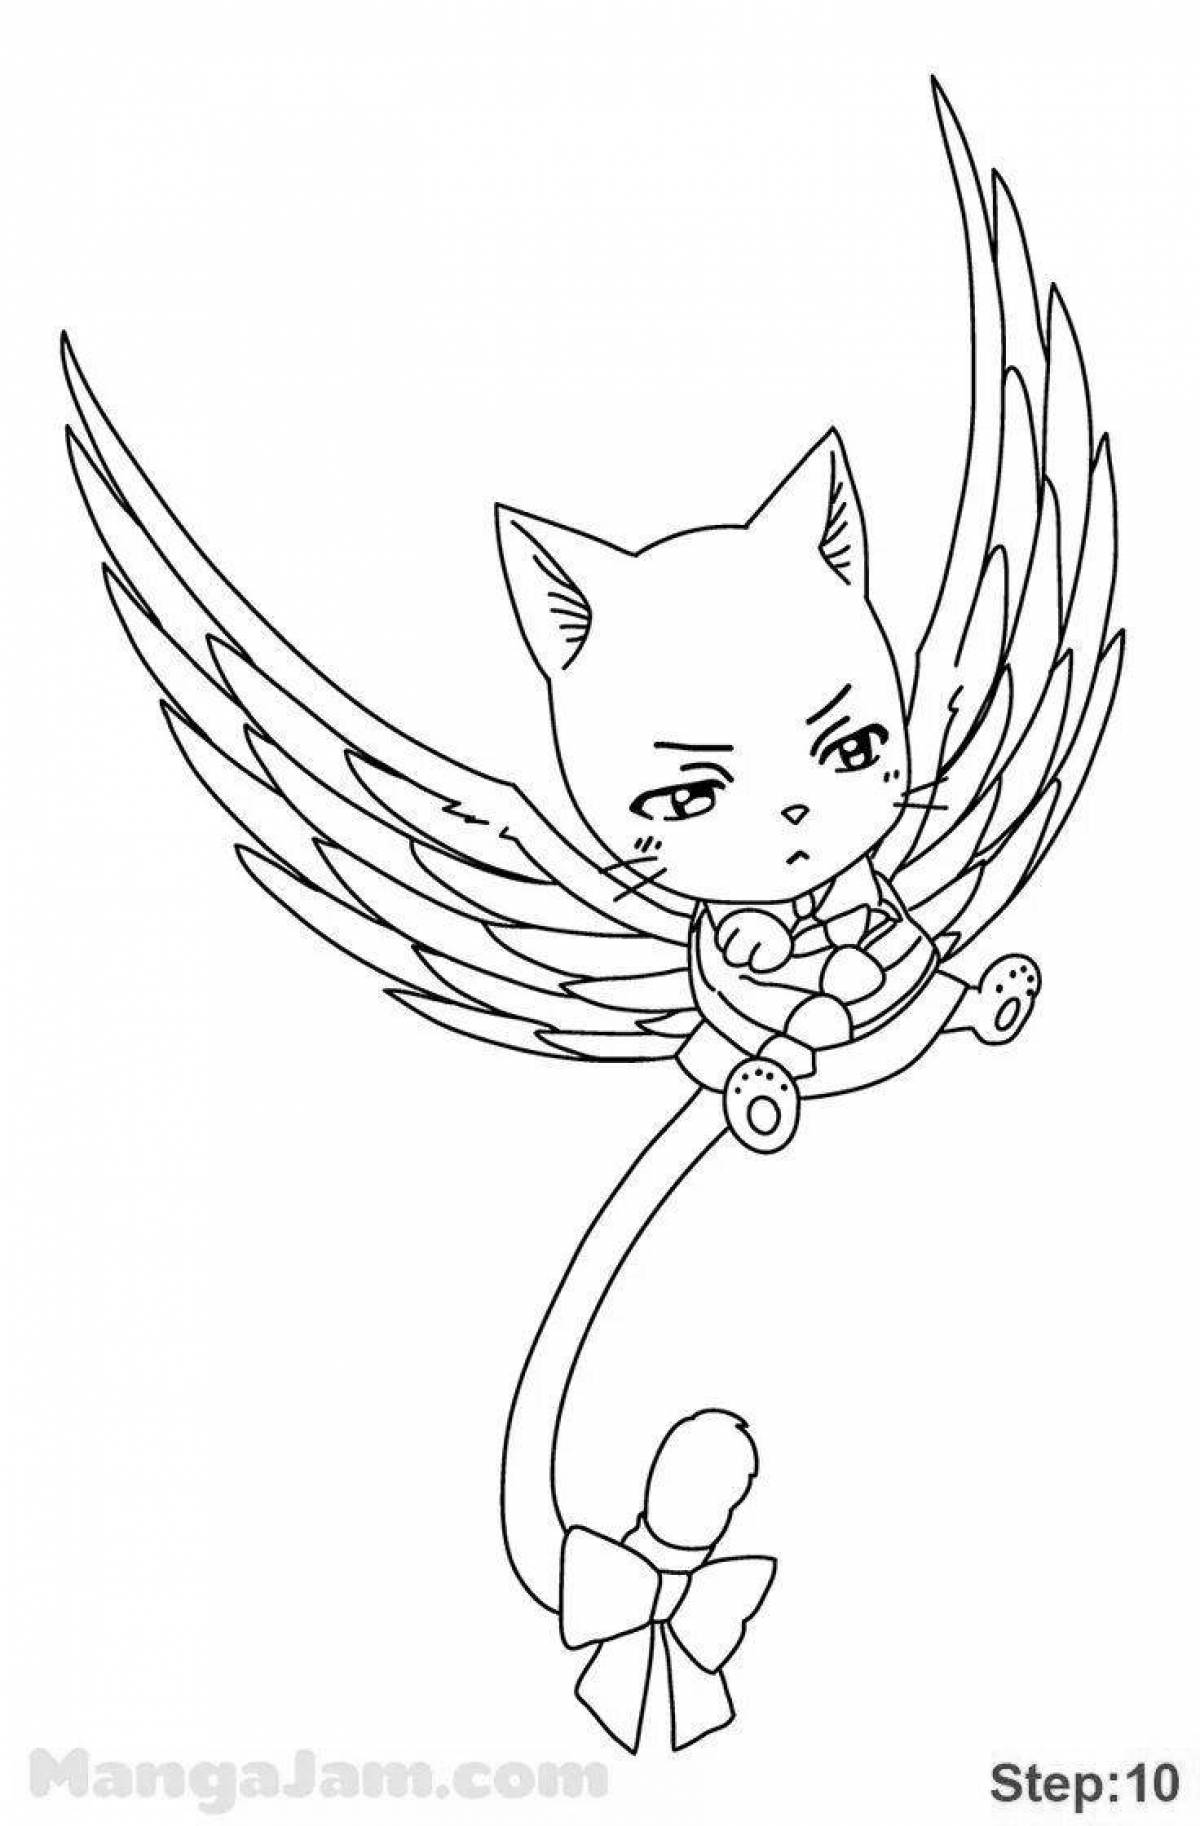 Coloring book shiny flying cat